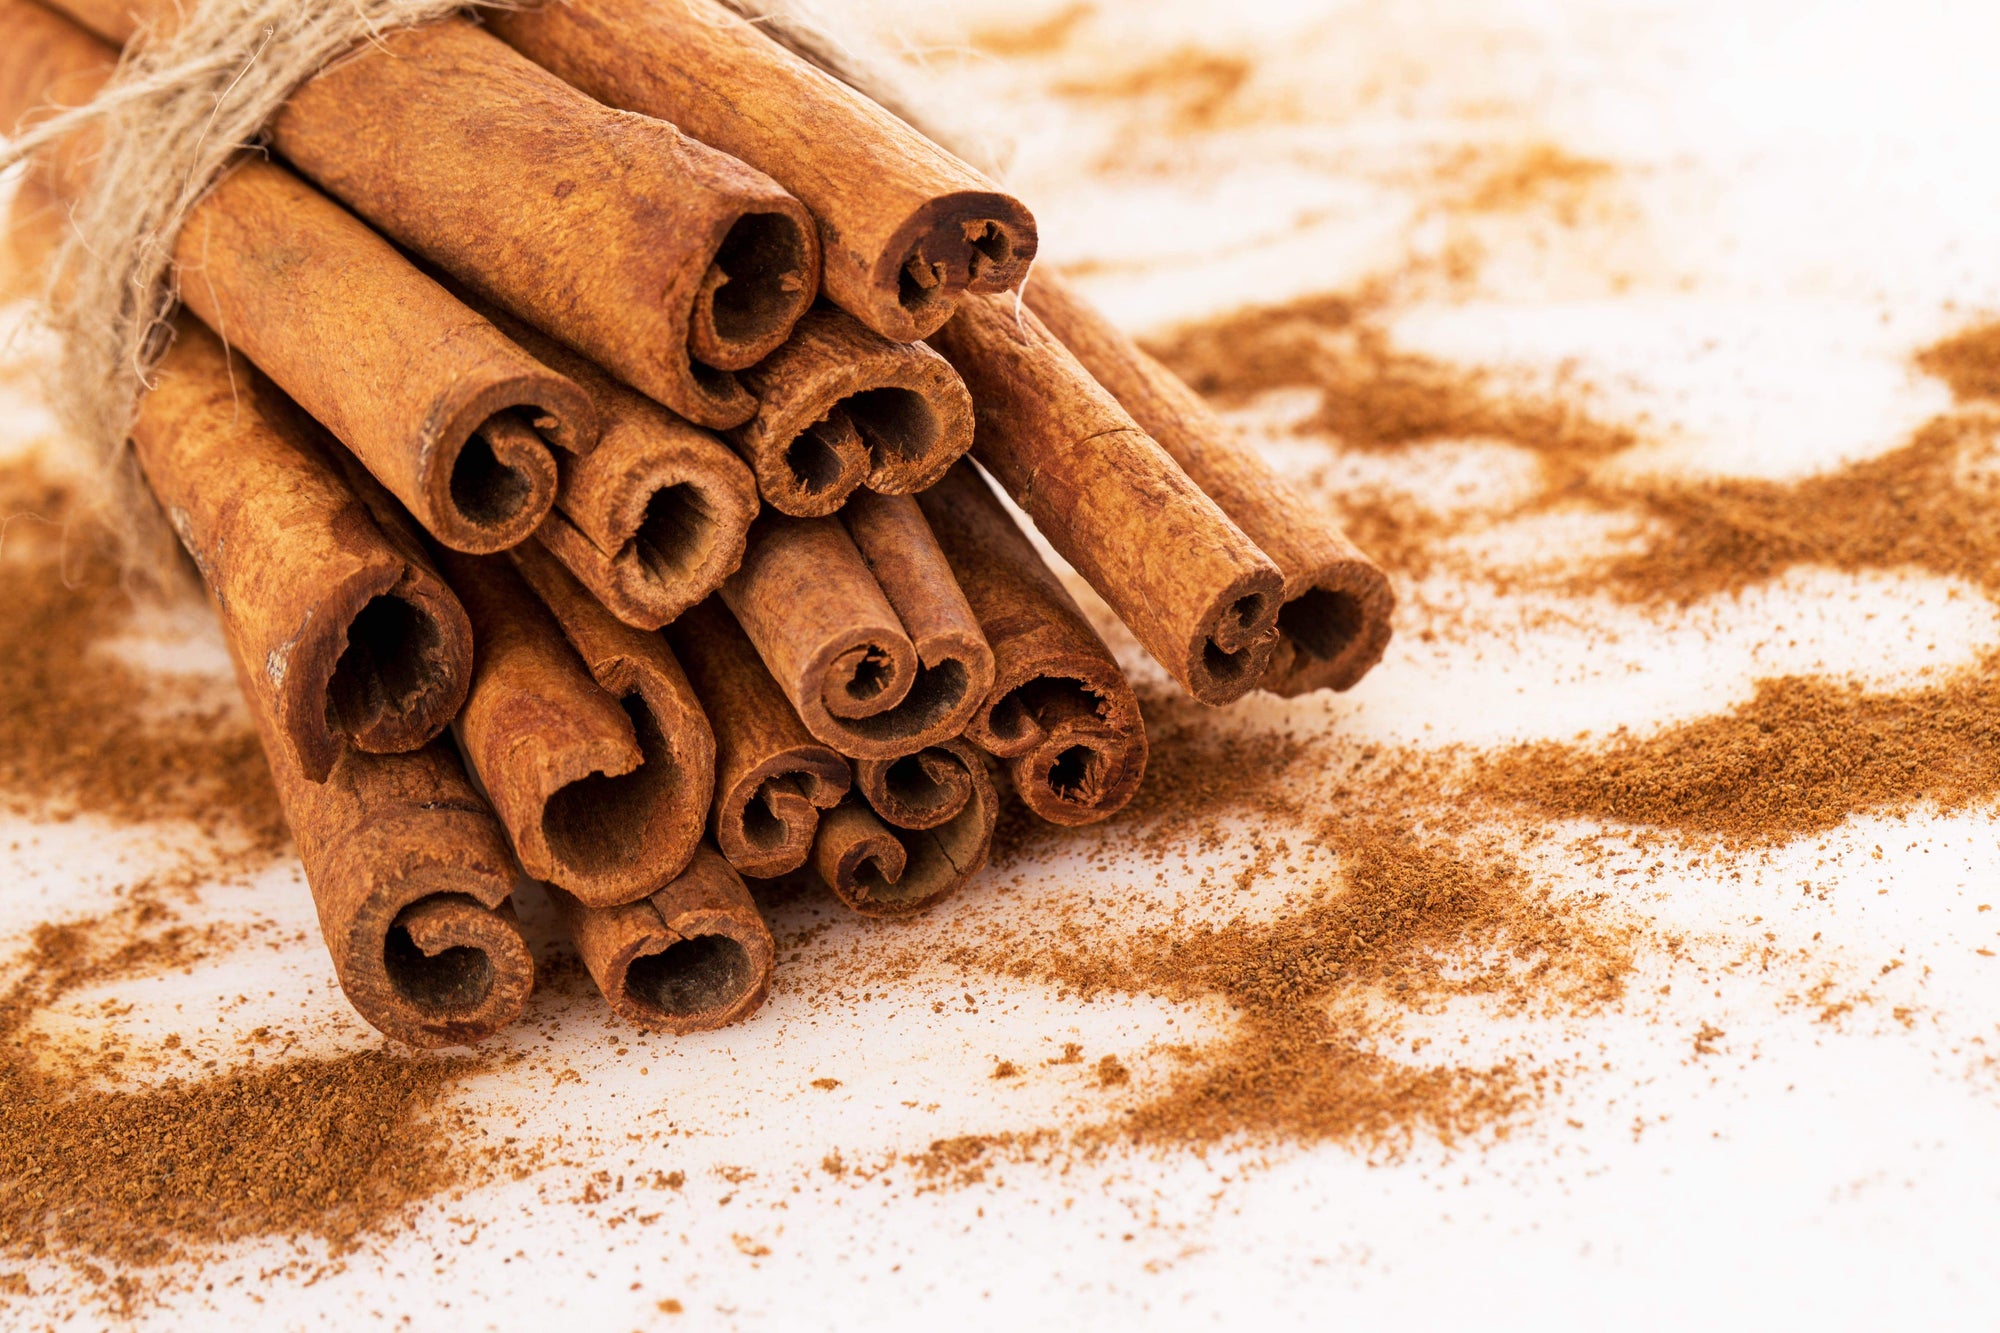 Cinnamon: 10 Interesting Facts About The Classic Spice